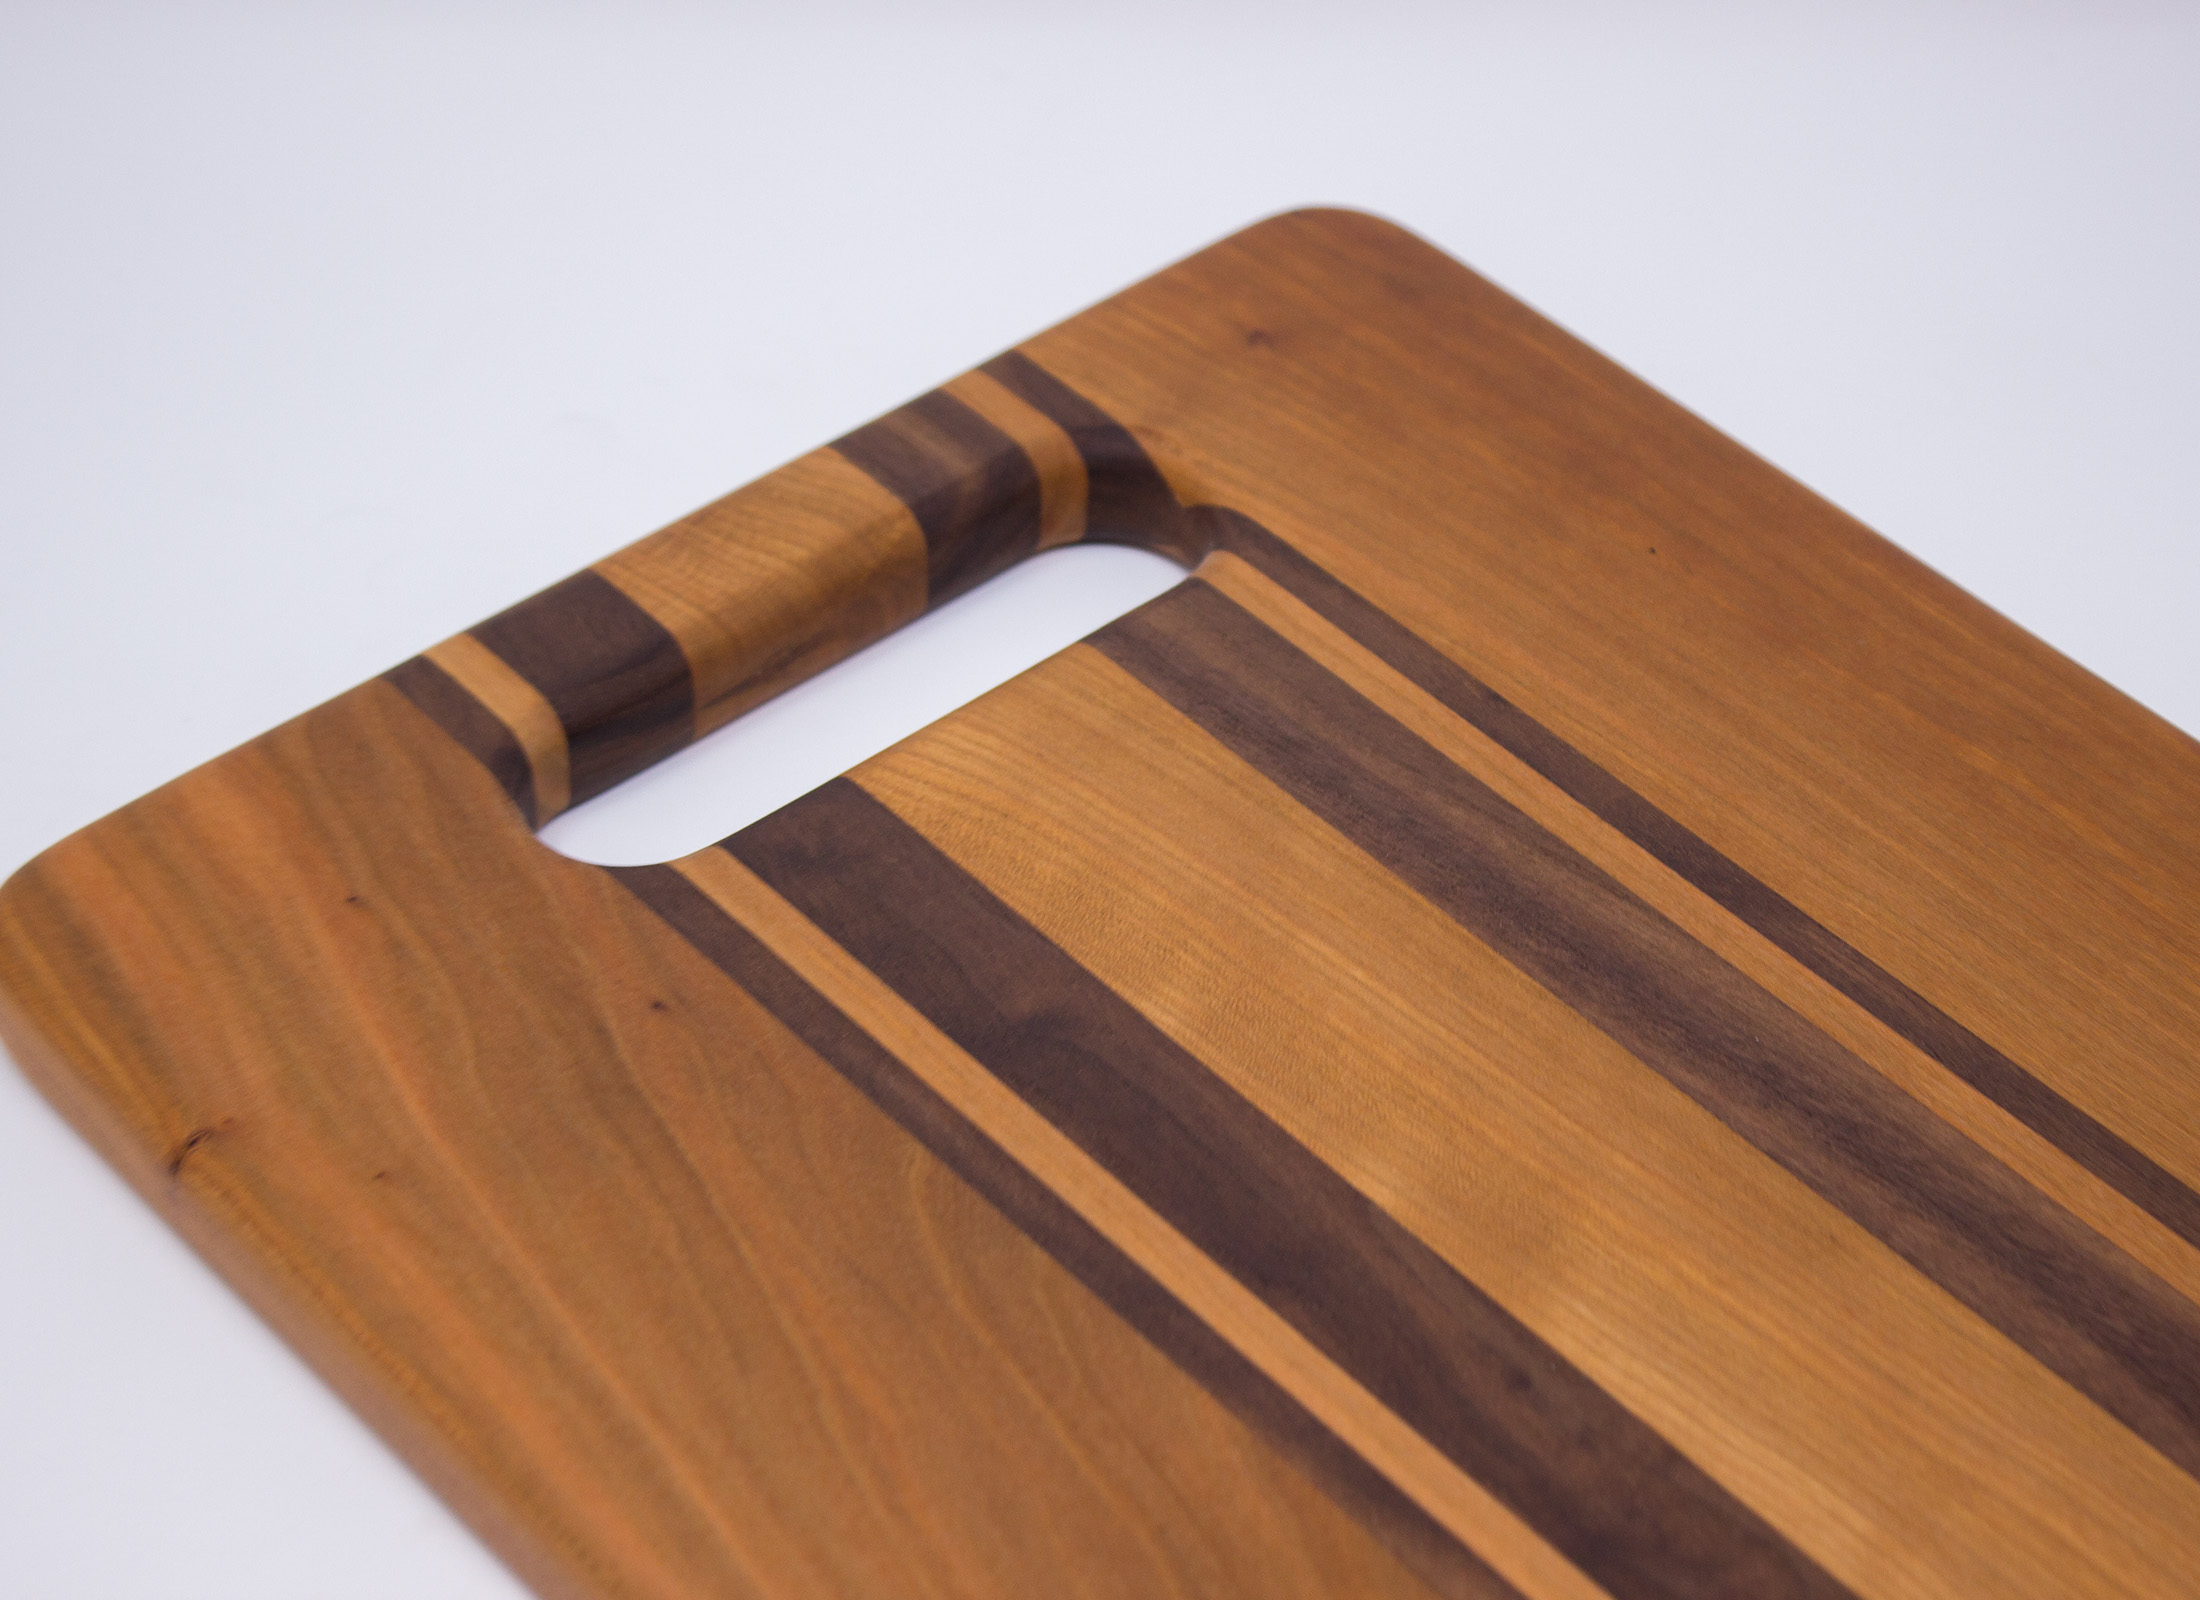 https://www.rockfordwoodcrafts.com/wp-content/uploads/Cherry-and-Walnut-with-Handle-Cutting-Board-Handle-Close-Up.jpg